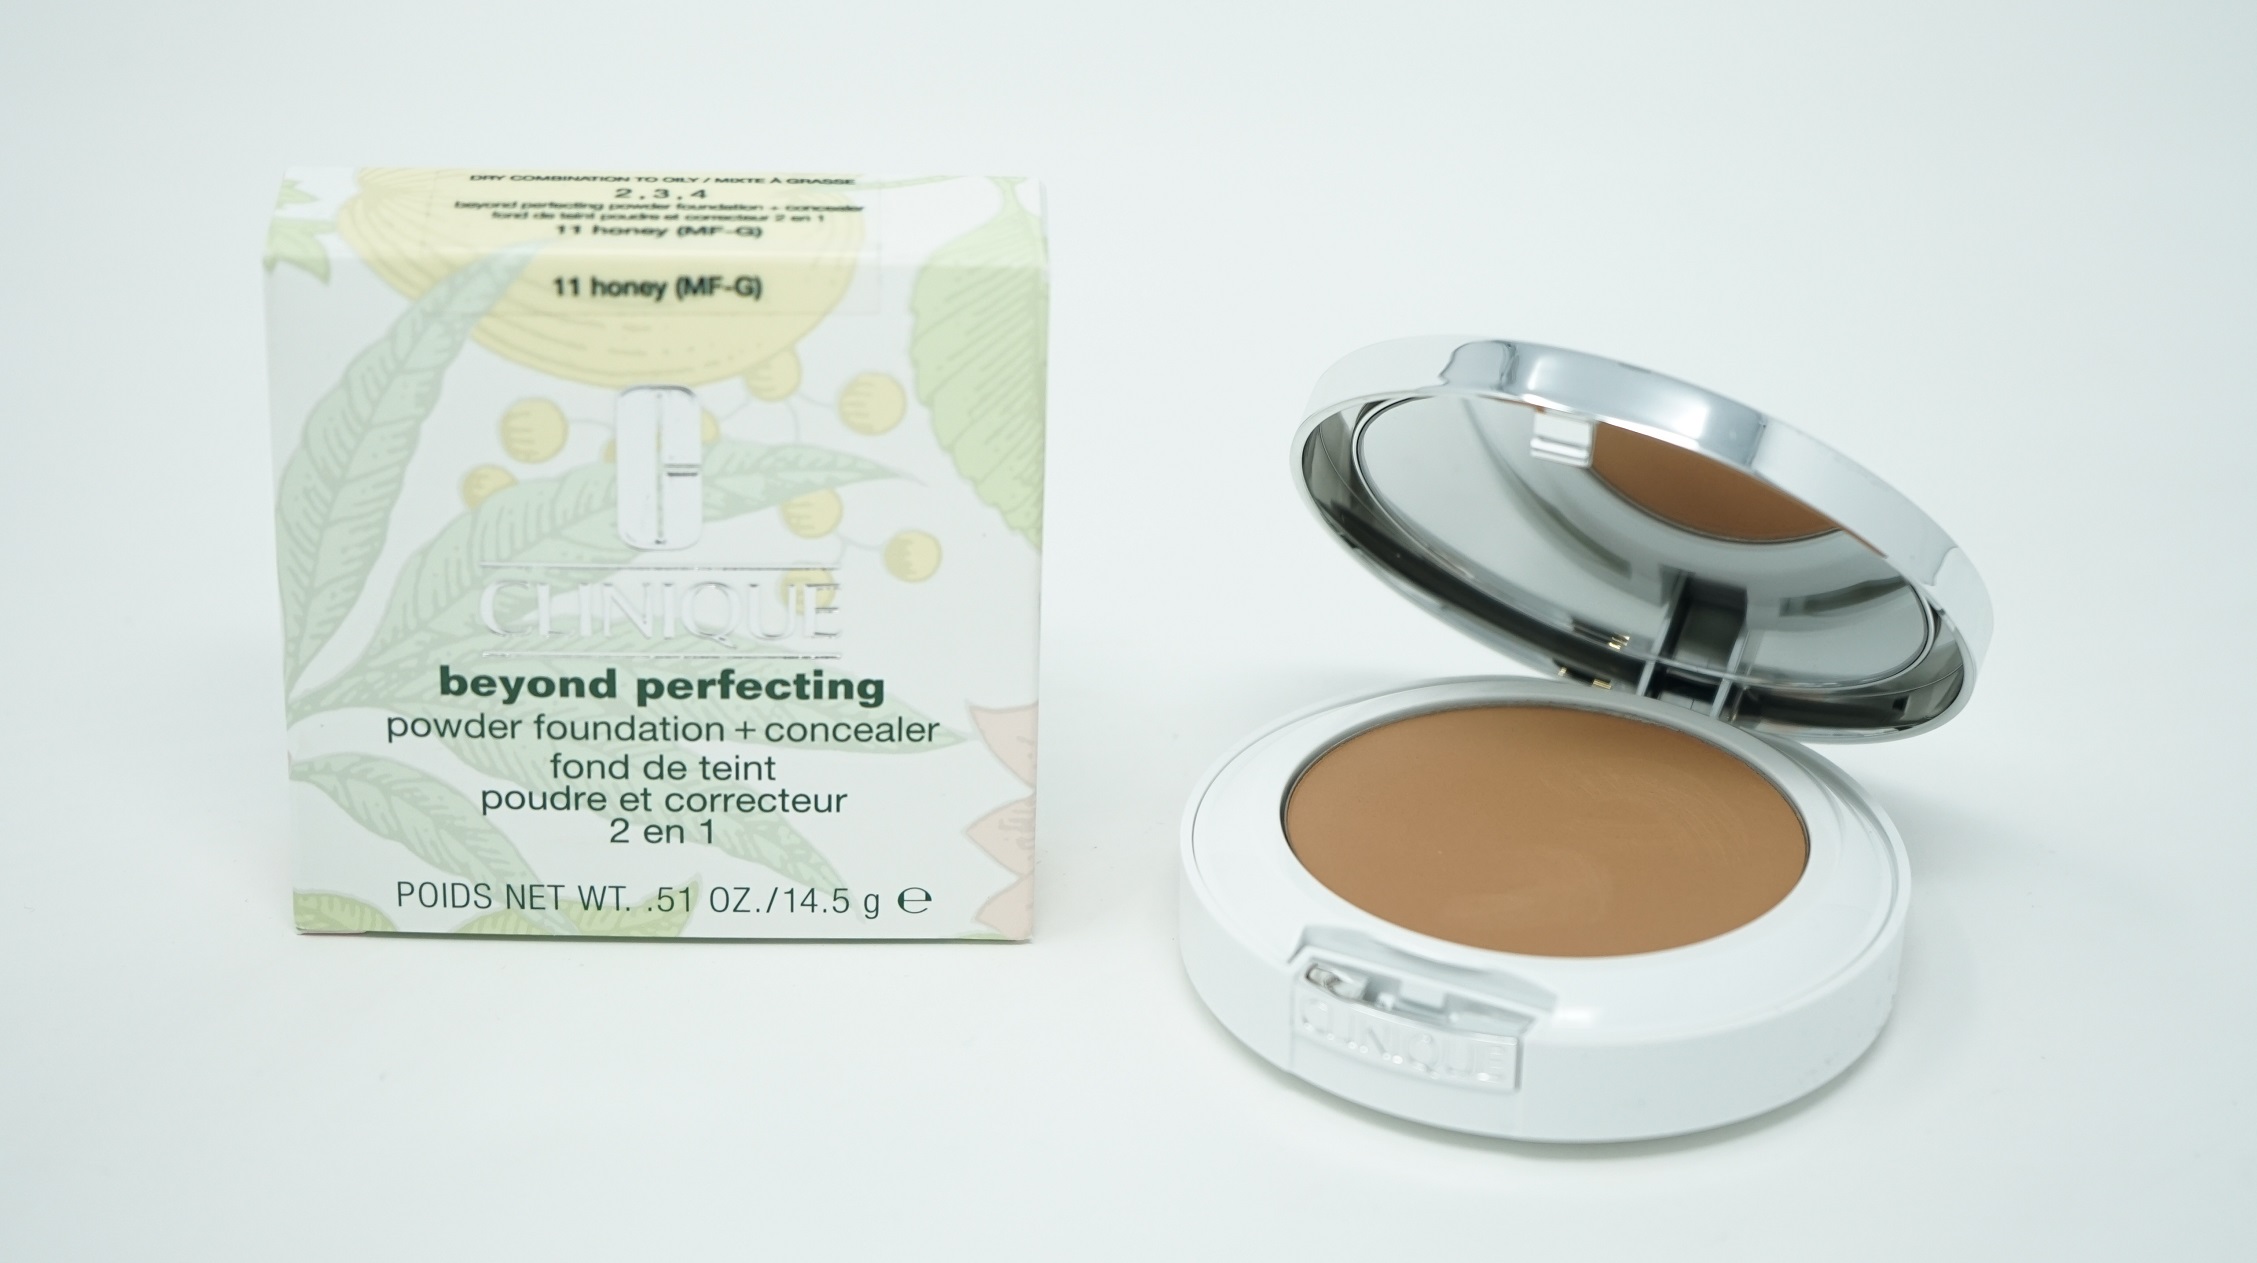 Clinique beyond perfecting powder foundation + concealer  11 honey (MF-G)